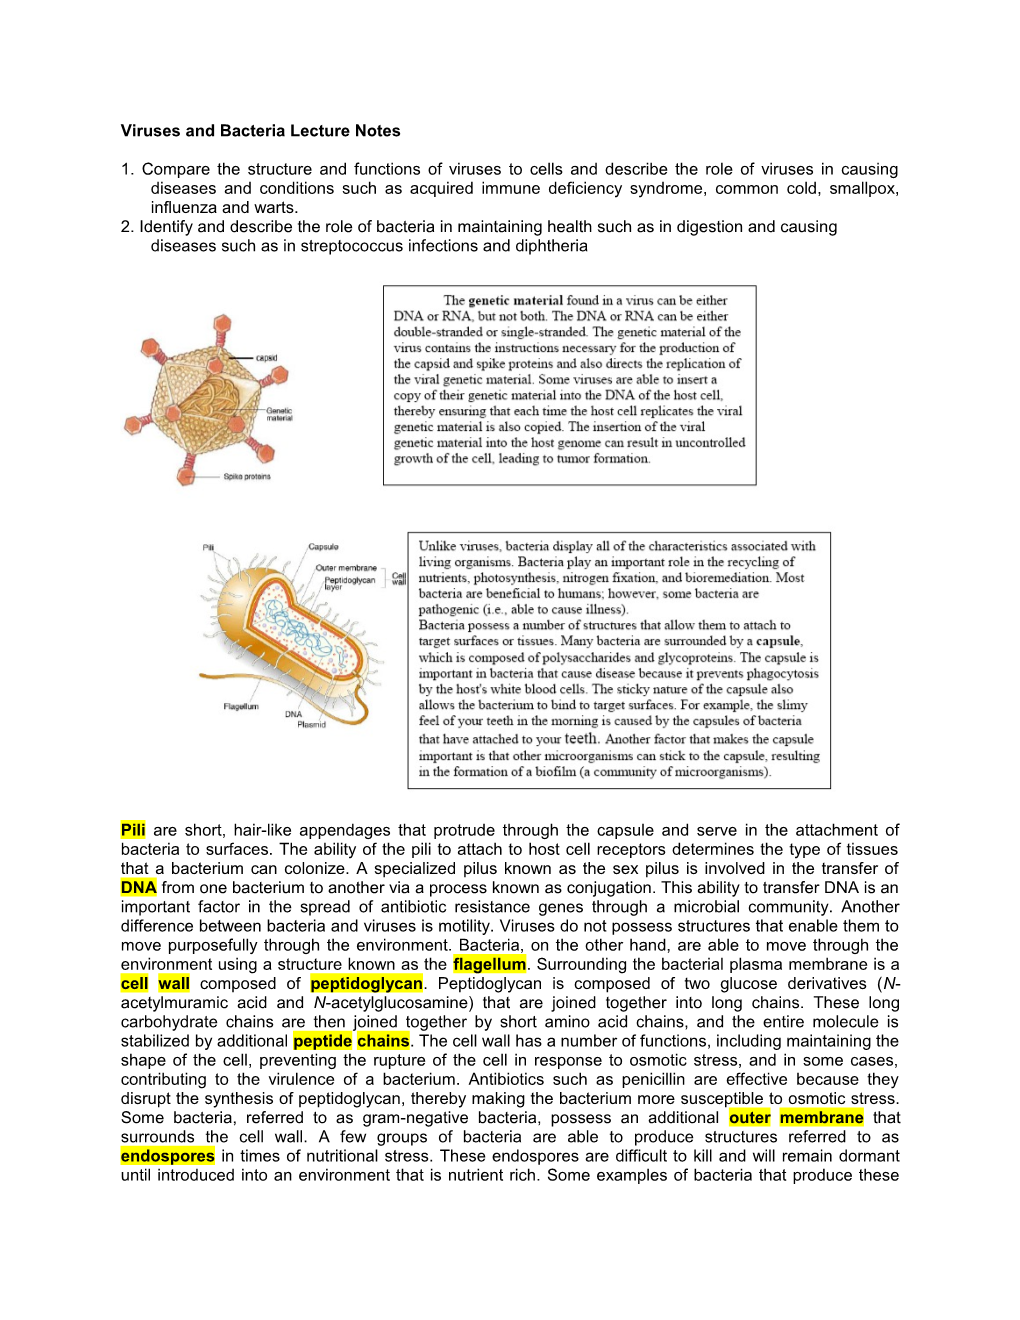 Viruses and Bacteria Lecture Notes